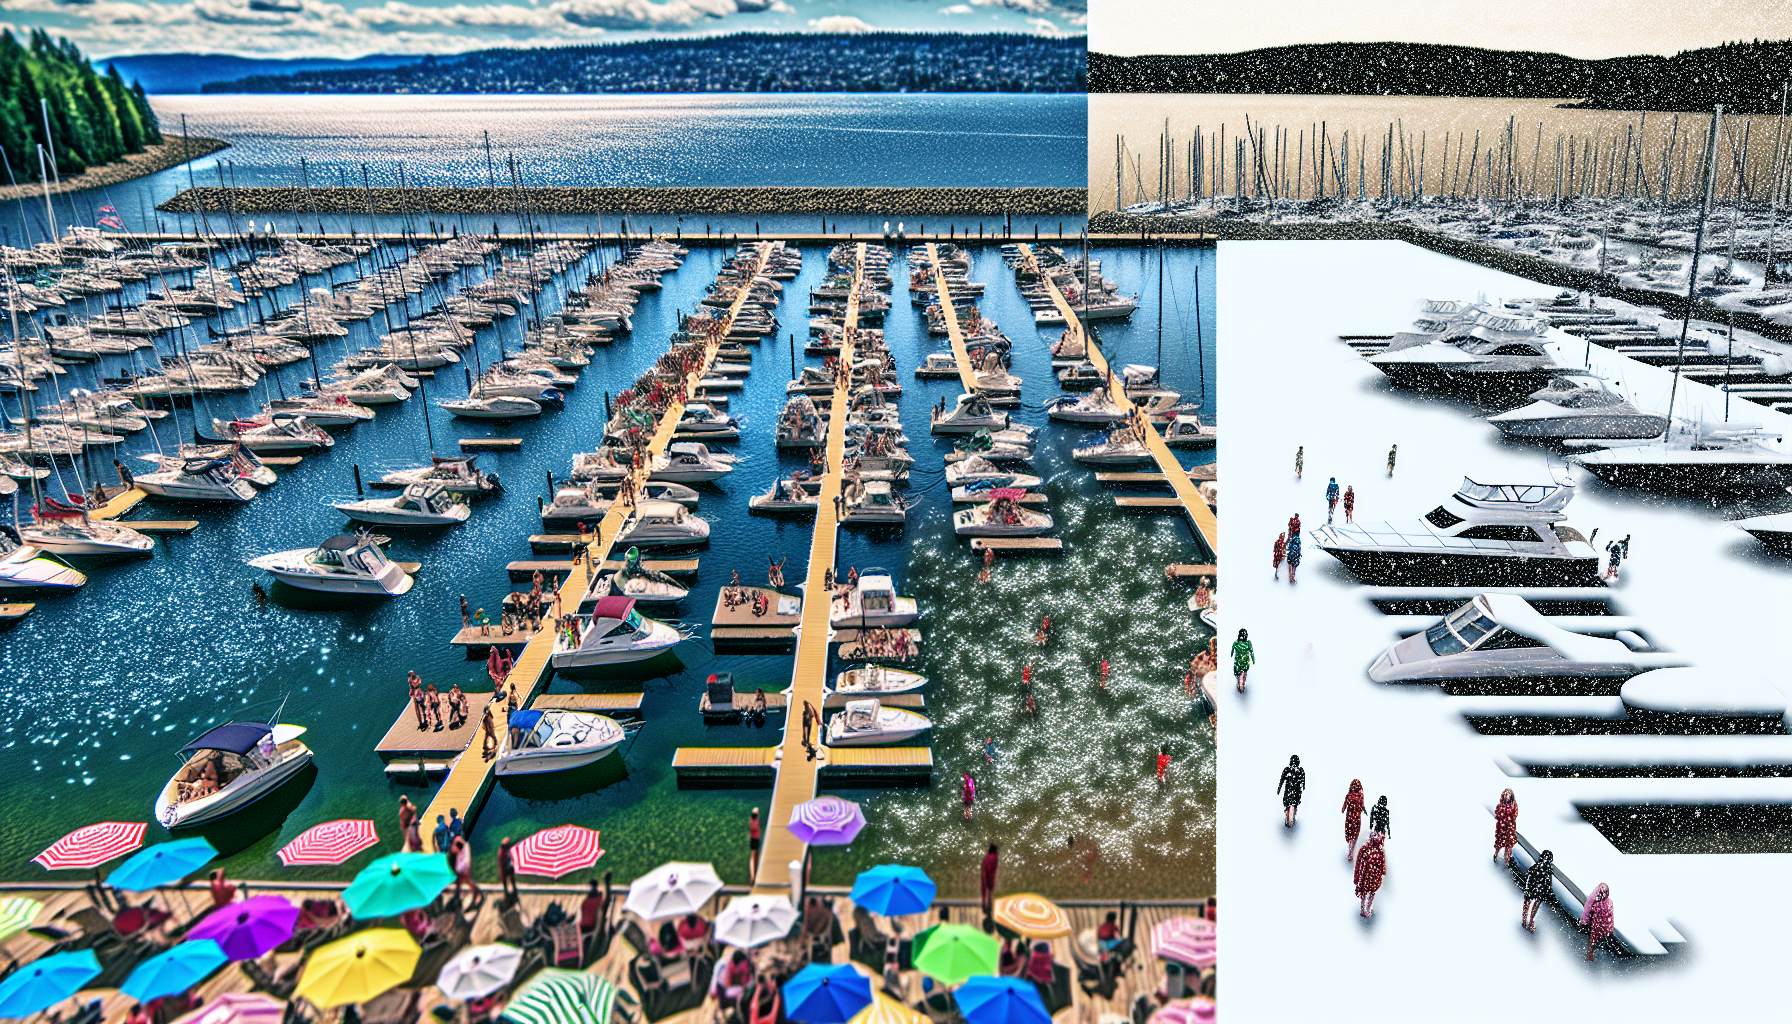 Boats in a marina during summer and winter